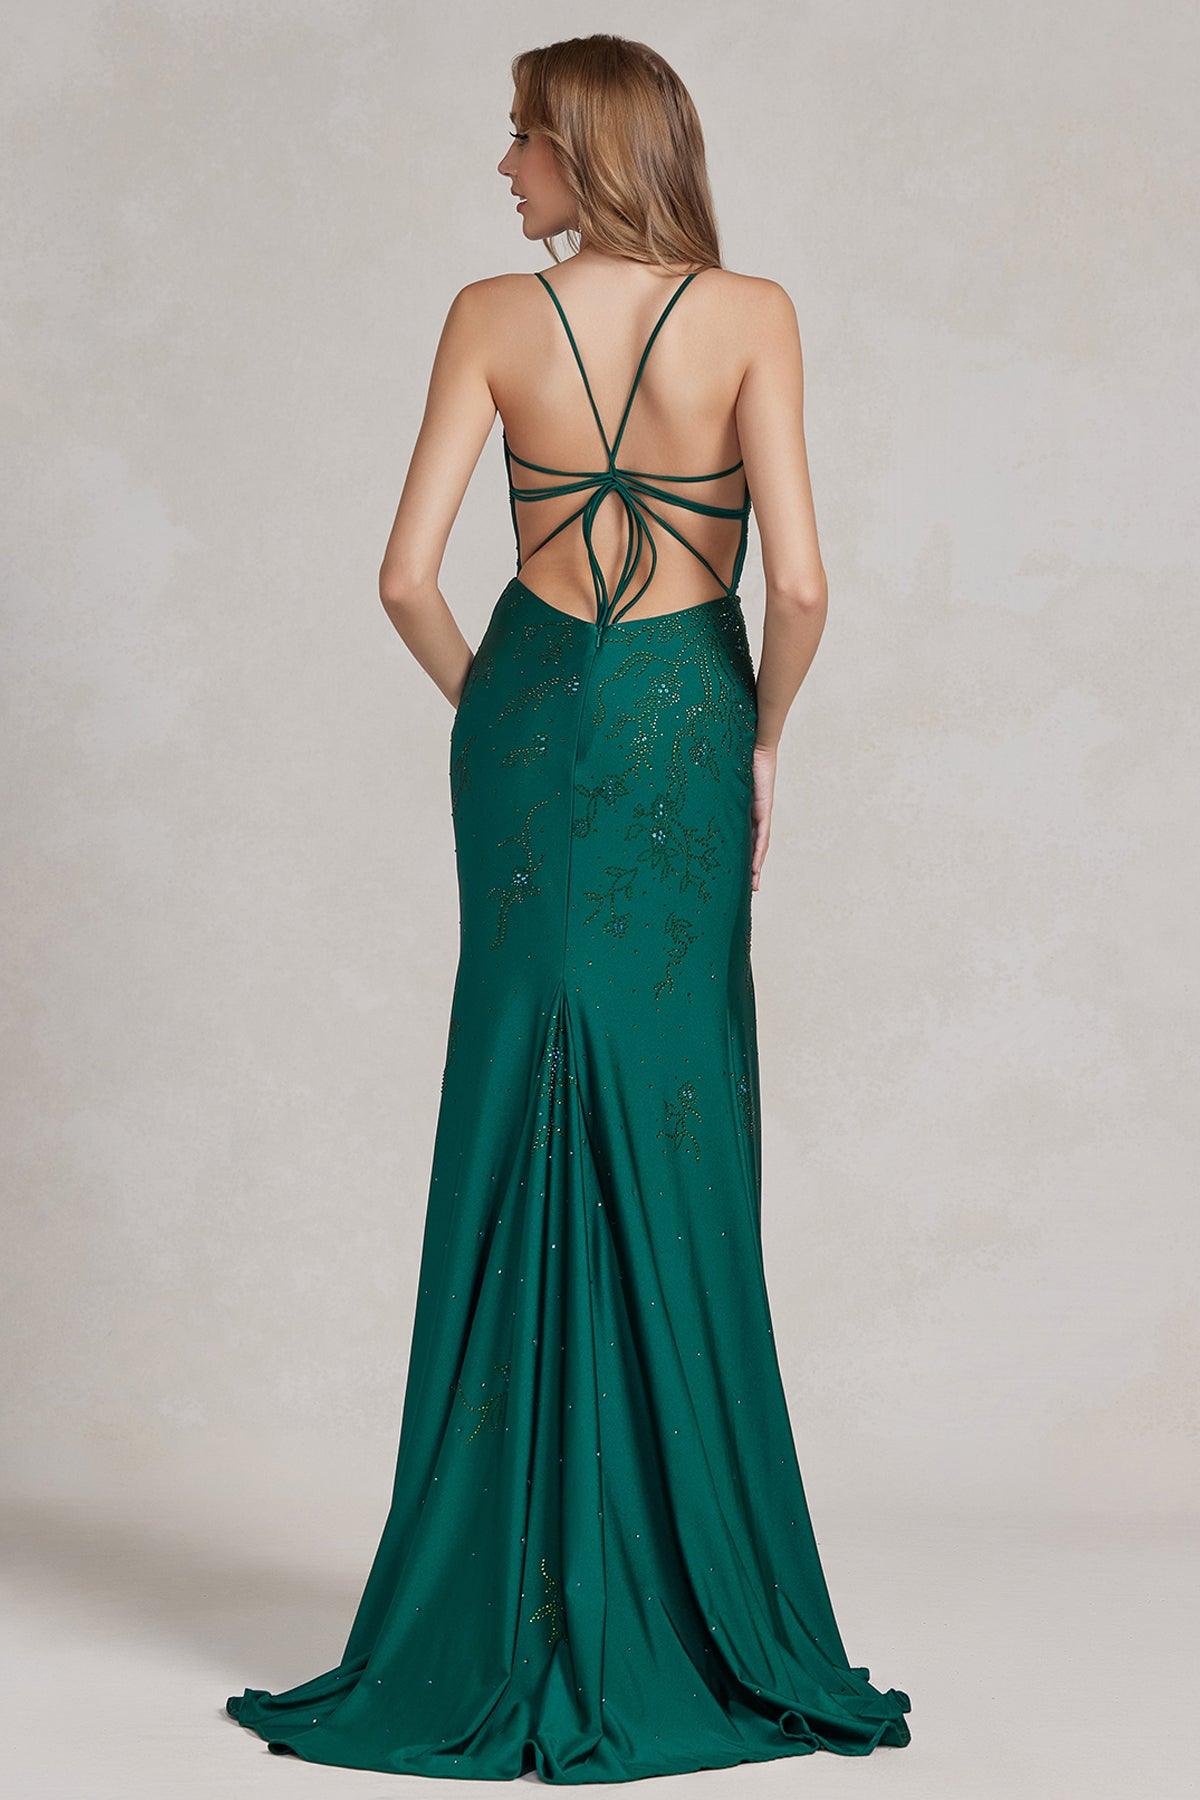 Nox Anabel E1206 Long Fitted Sexy Prom Gown